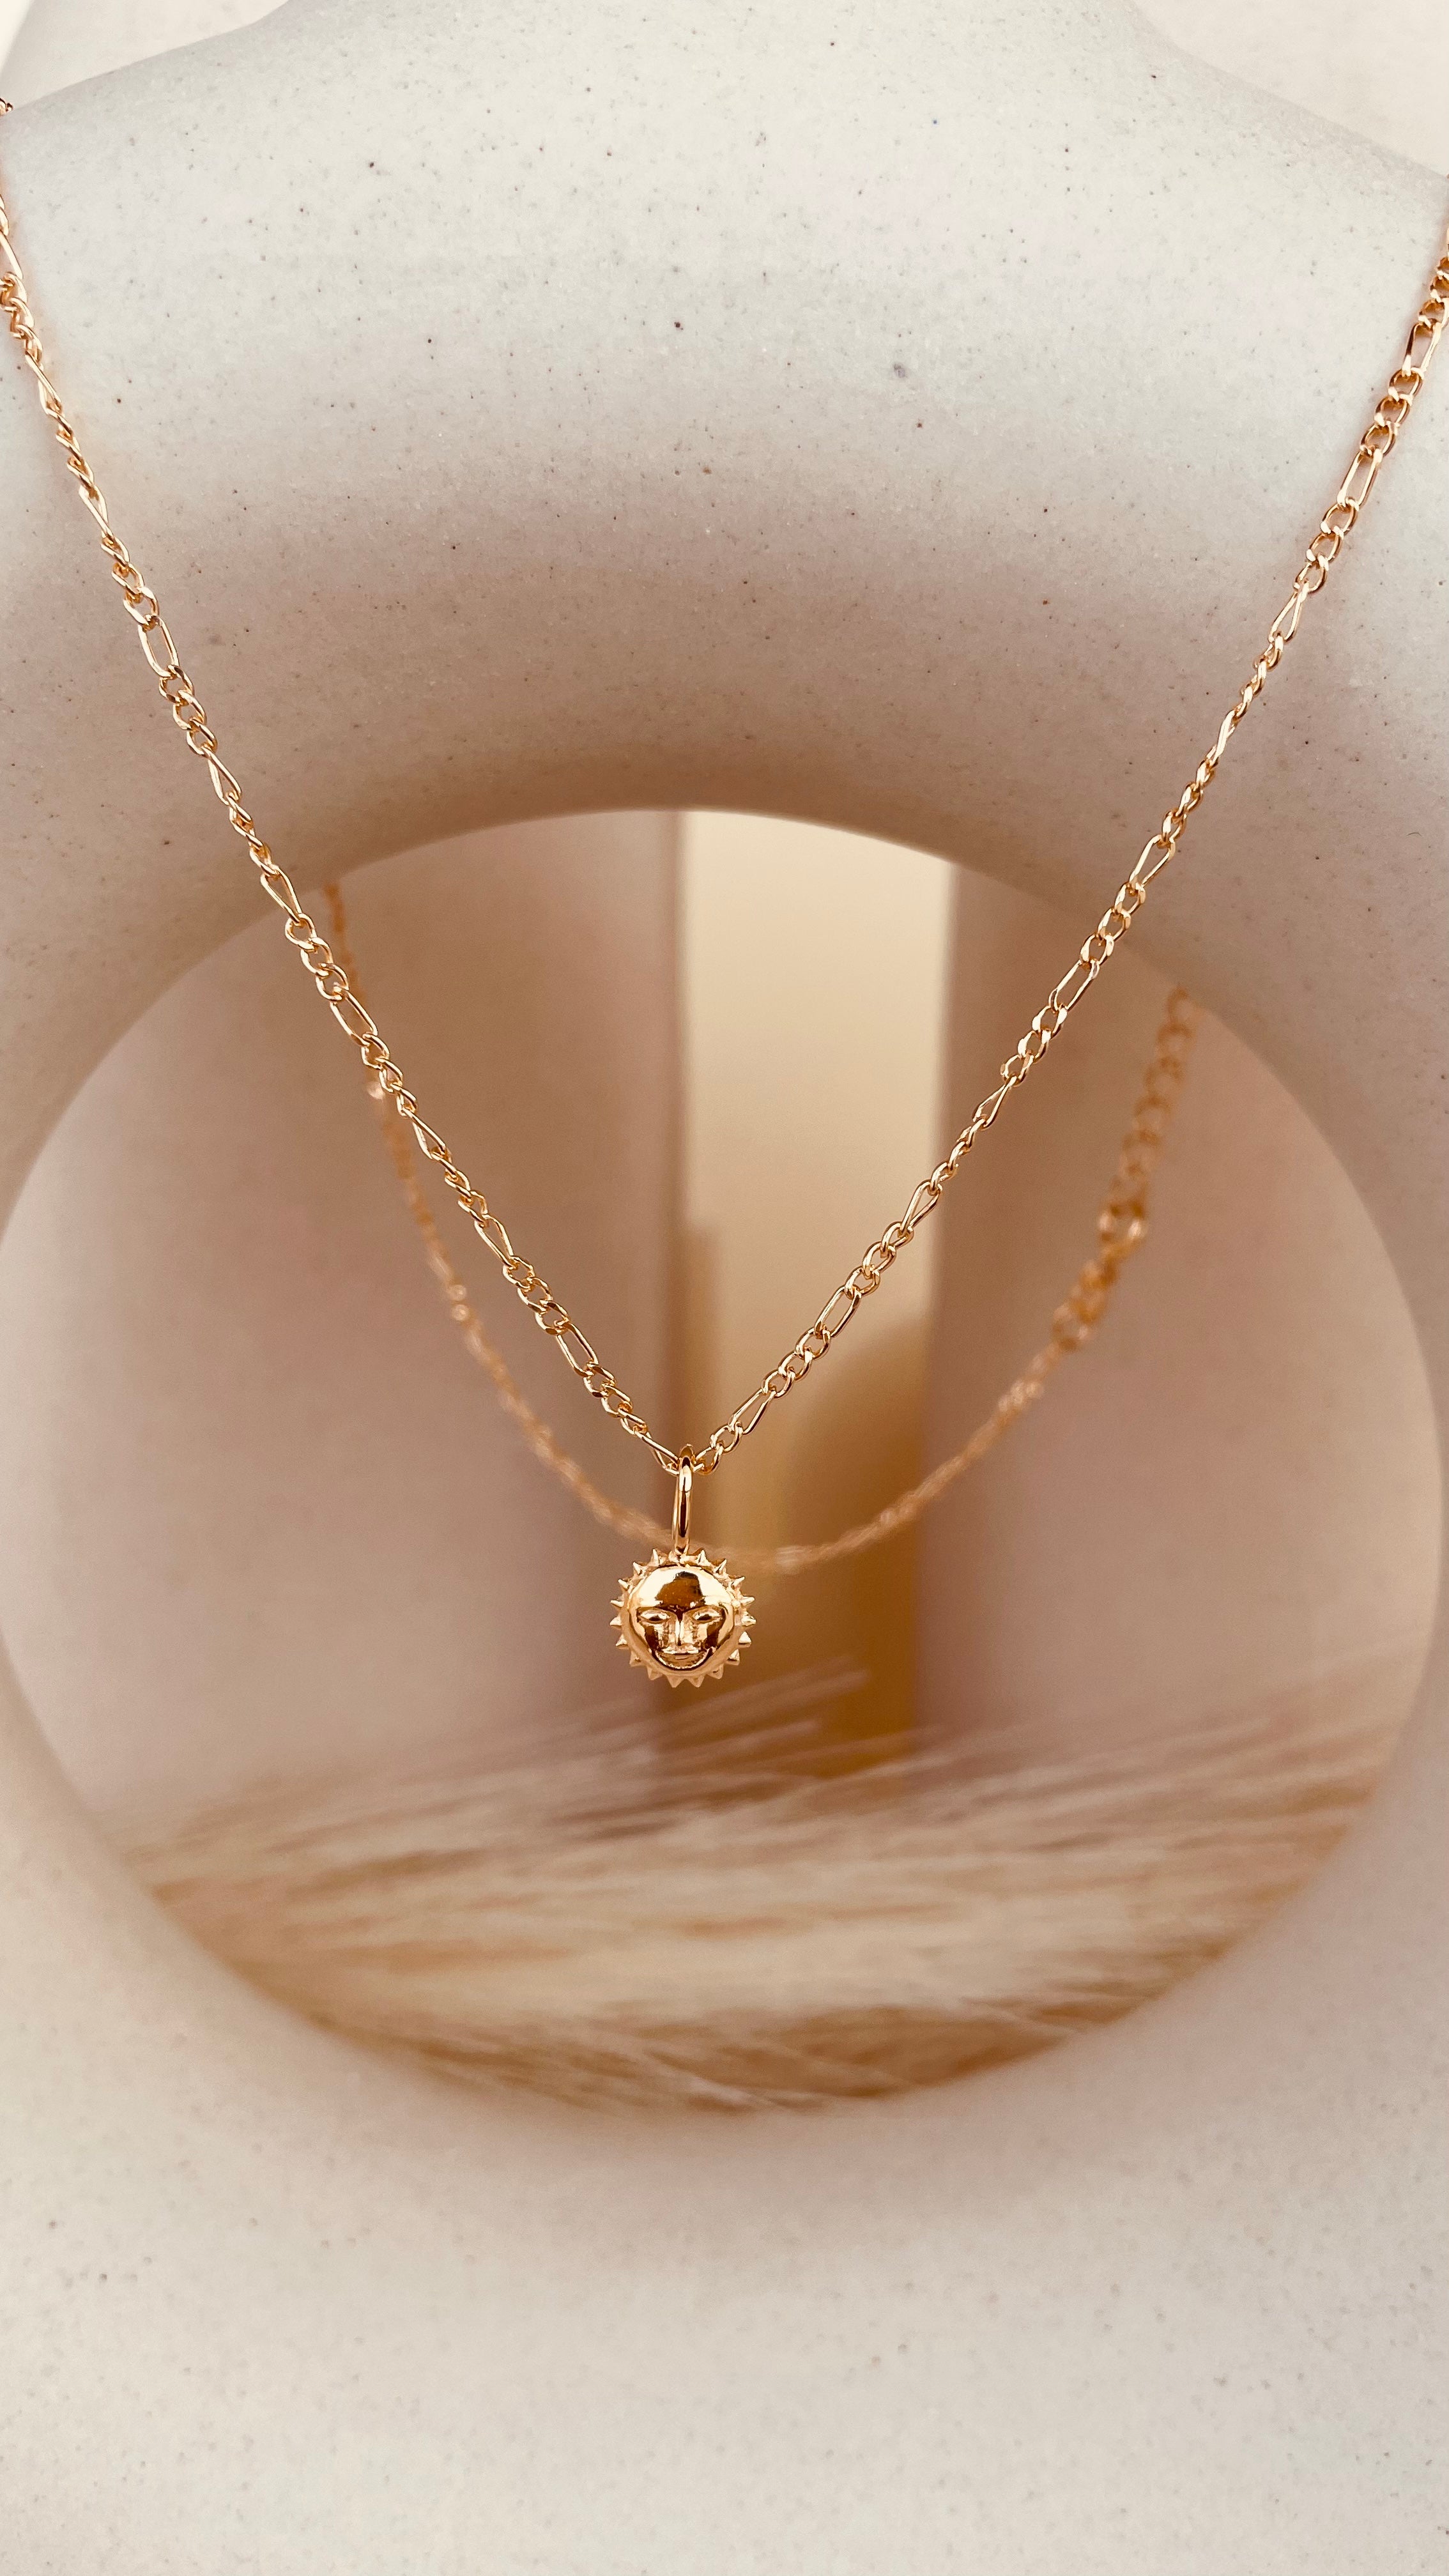 Dainty Steller Sun Charm Necklace with Figaro Chain - Octonov 